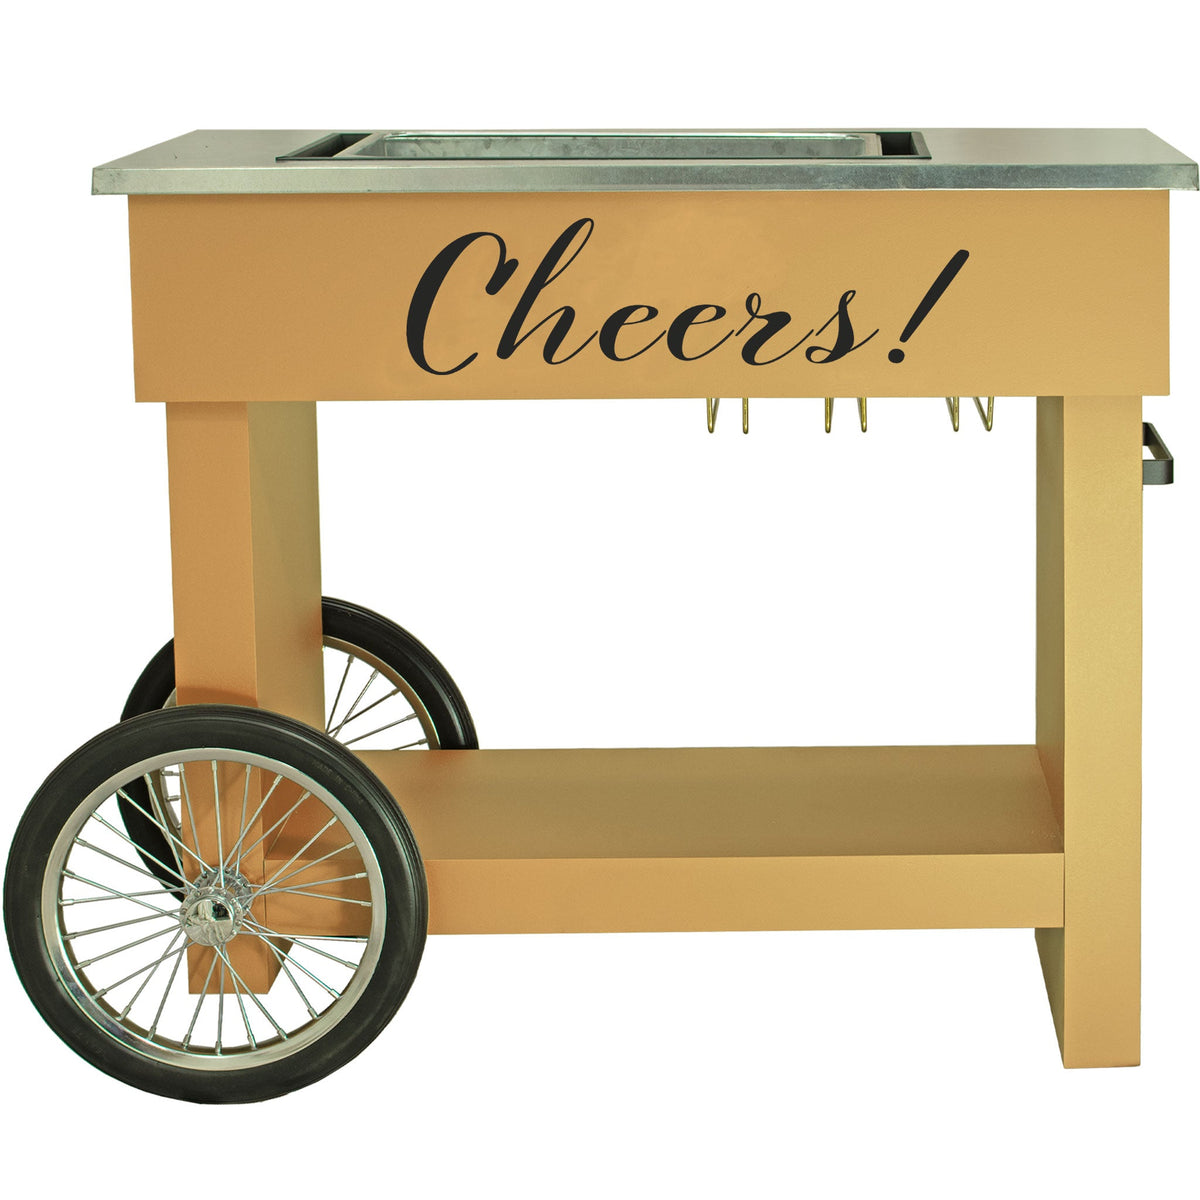 Lee Display's Champagne and Wine Bar Cart with Wheels in Champagne Color and a Cheers! Decal